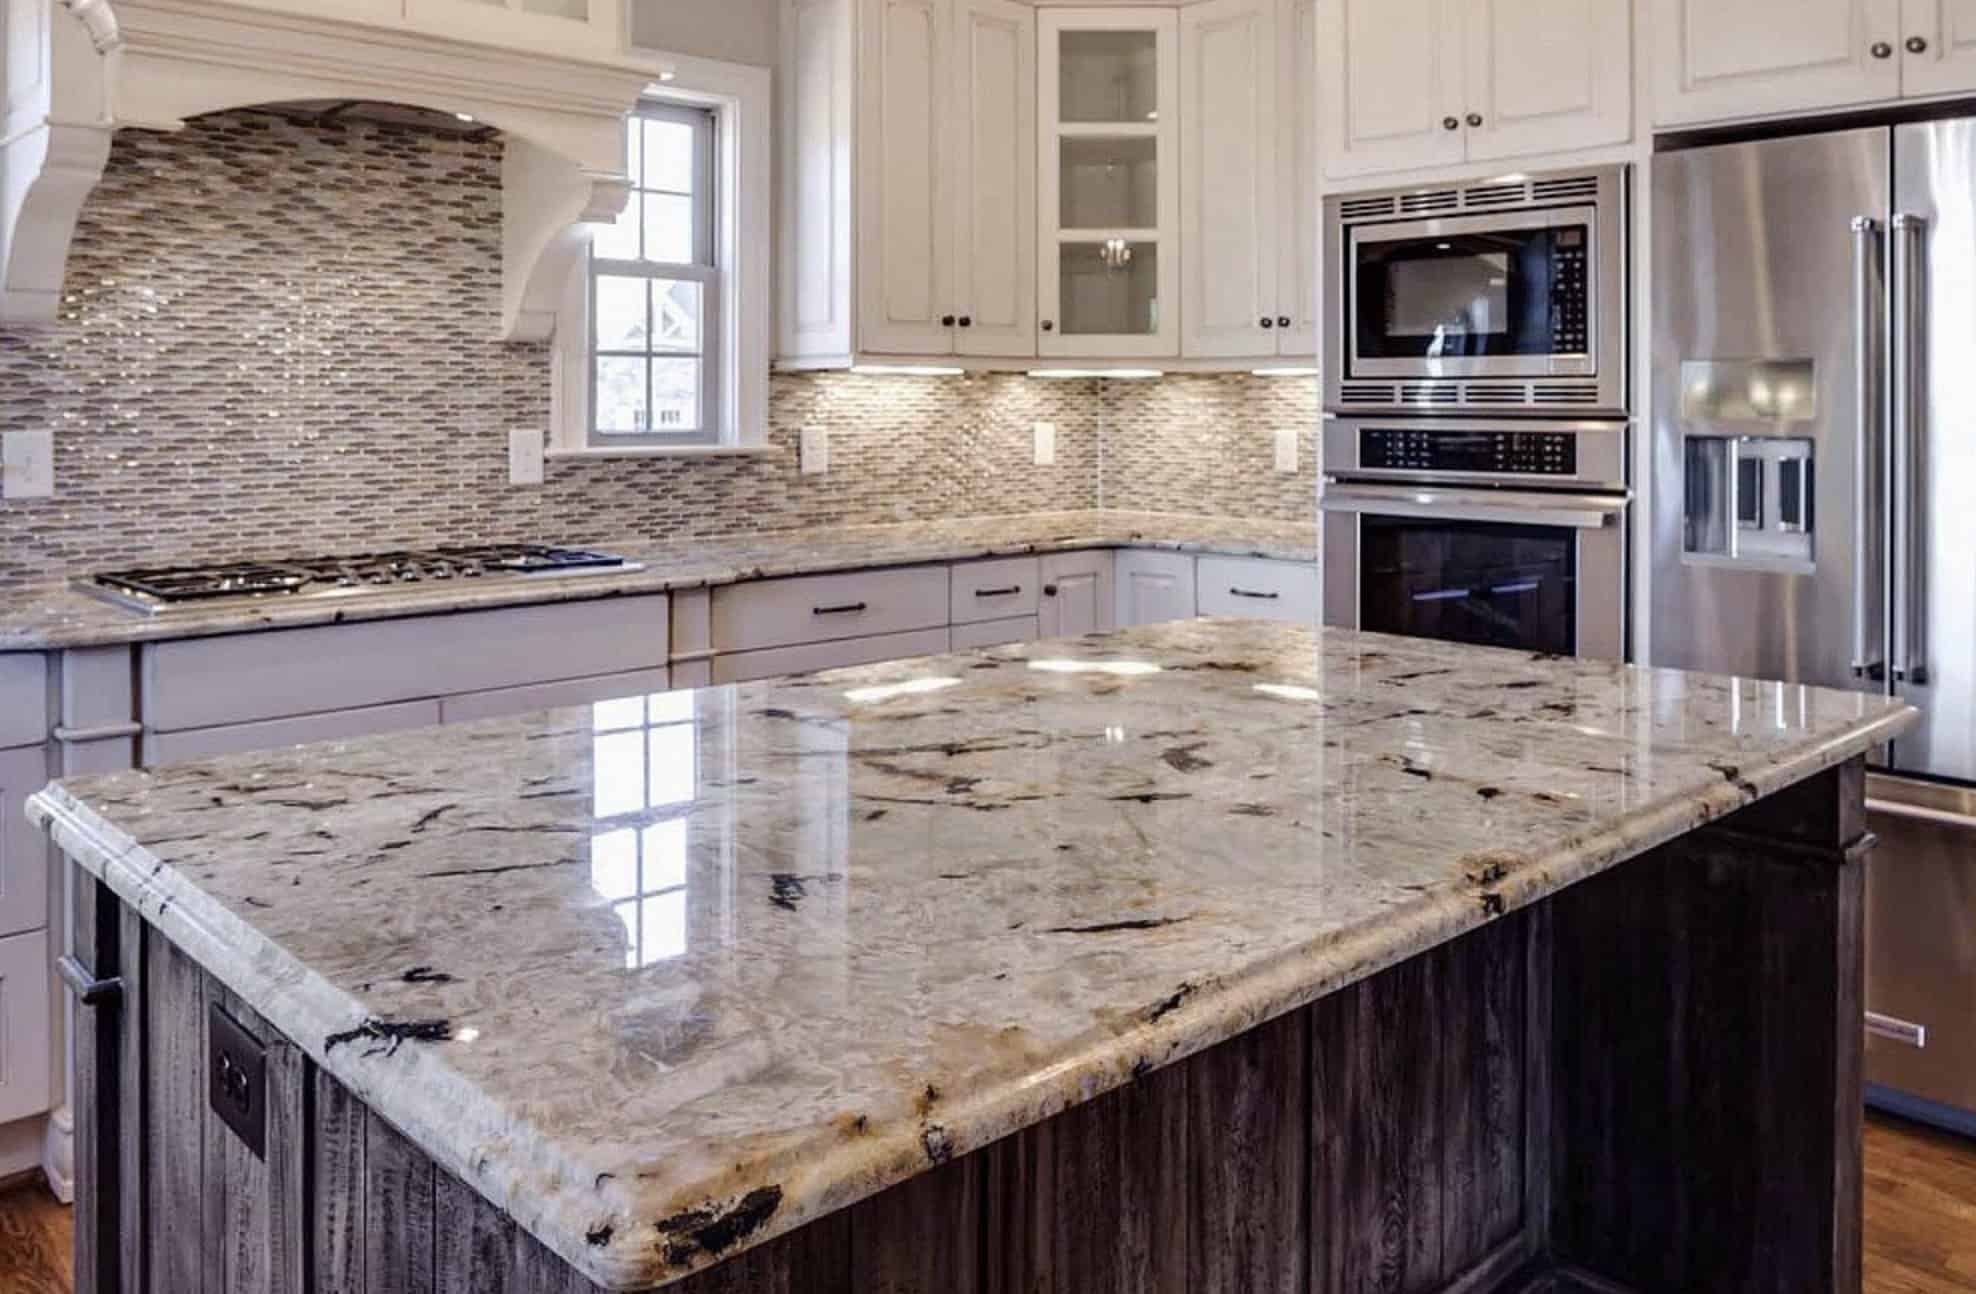 All about Granite Countertops Cost, Maintenance, Pros and Cons